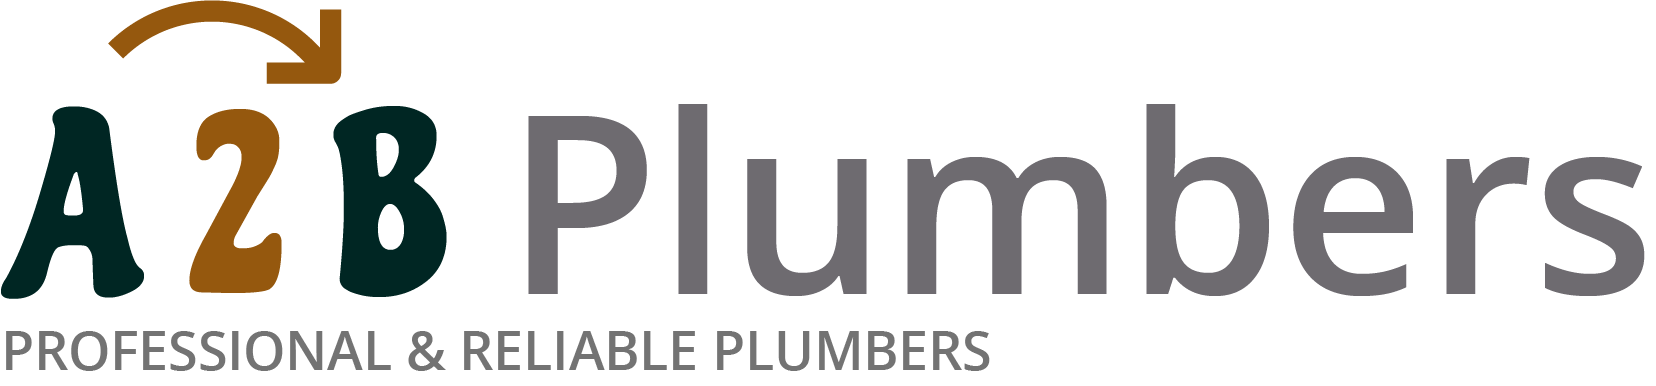 If you need a boiler installed, a radiator repaired or a leaking tap fixed, call us now - we provide services for properties in Kempston and the local area.